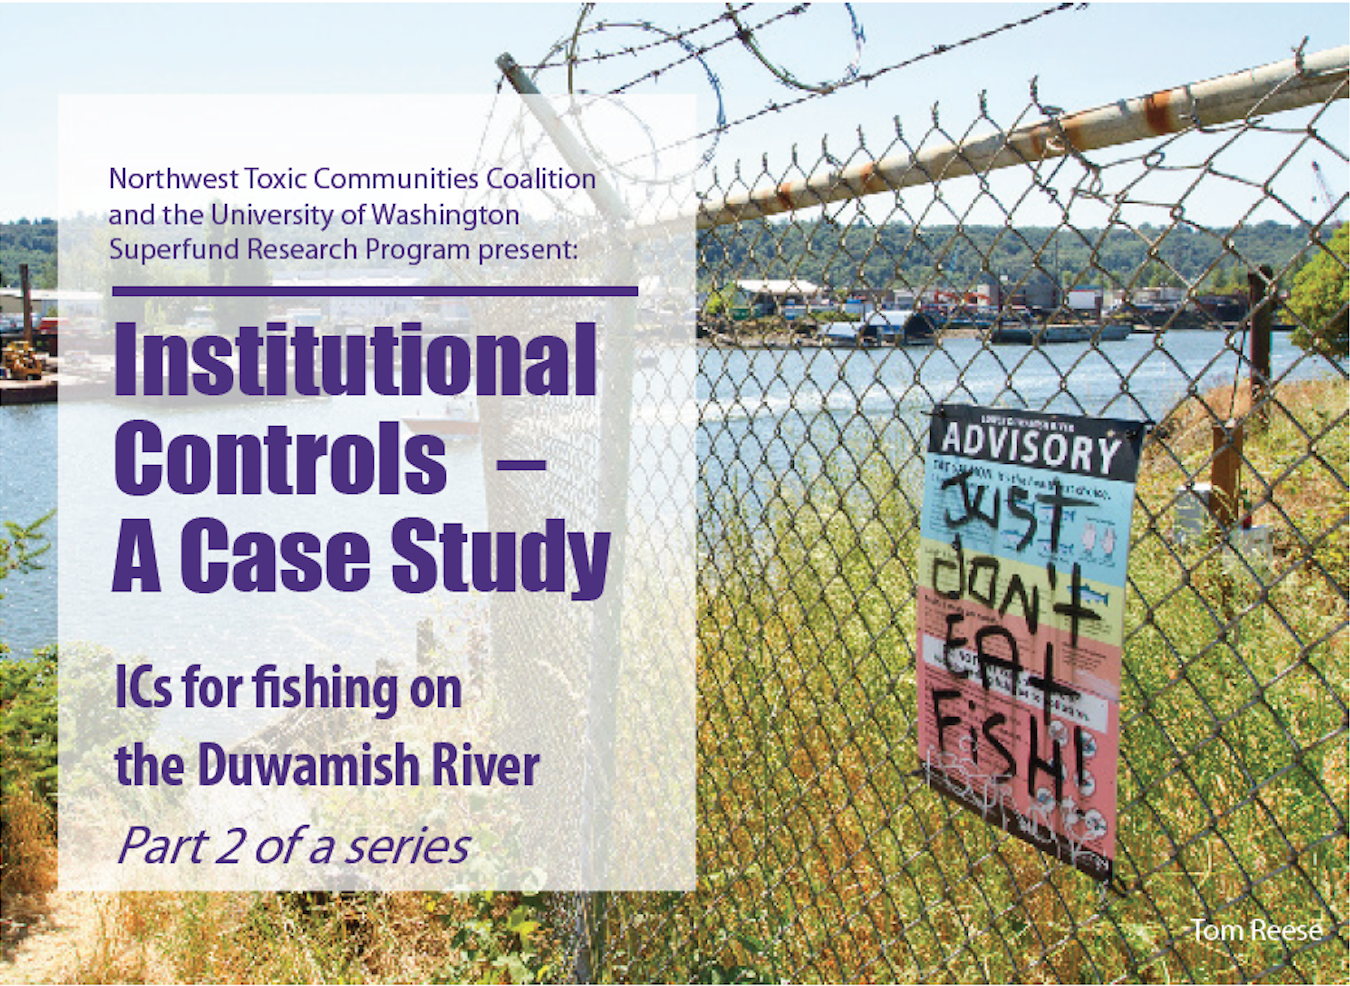 The title of the webinar superimposed on a photo of the Duwamish River with a chainlink fence in the foreground and a fishing advisory sign which has been spray-painted to read "Just don't eat fish."